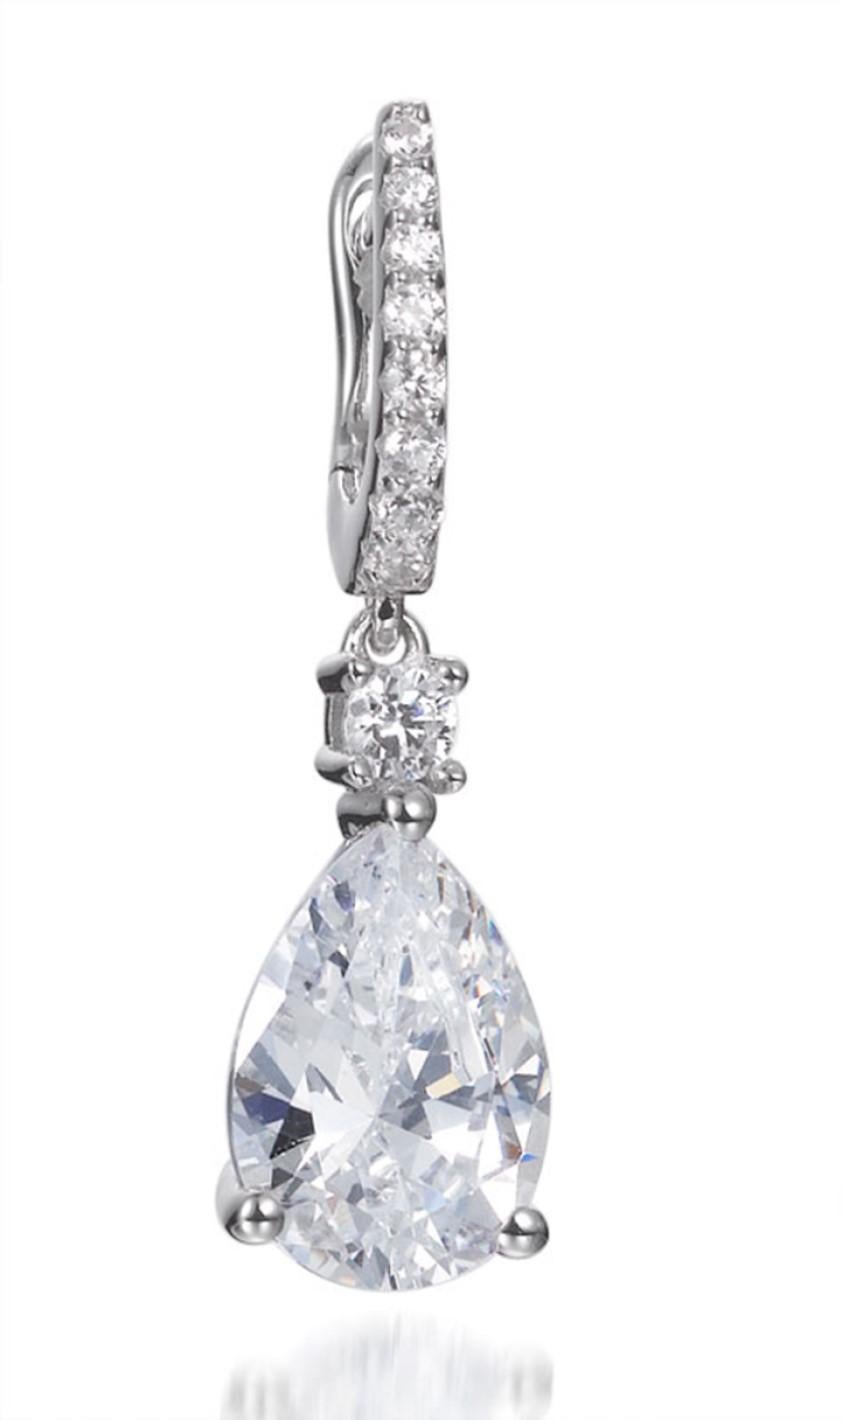 These dazzling earrings are a sophisticated statement piece that are designed to take you anywhere. 

Featuring a 3.03ct pear shape cubic zirconia suspended below a lever back clasp set with dazzling round brilliant cut cubic zirconia.

Compliment